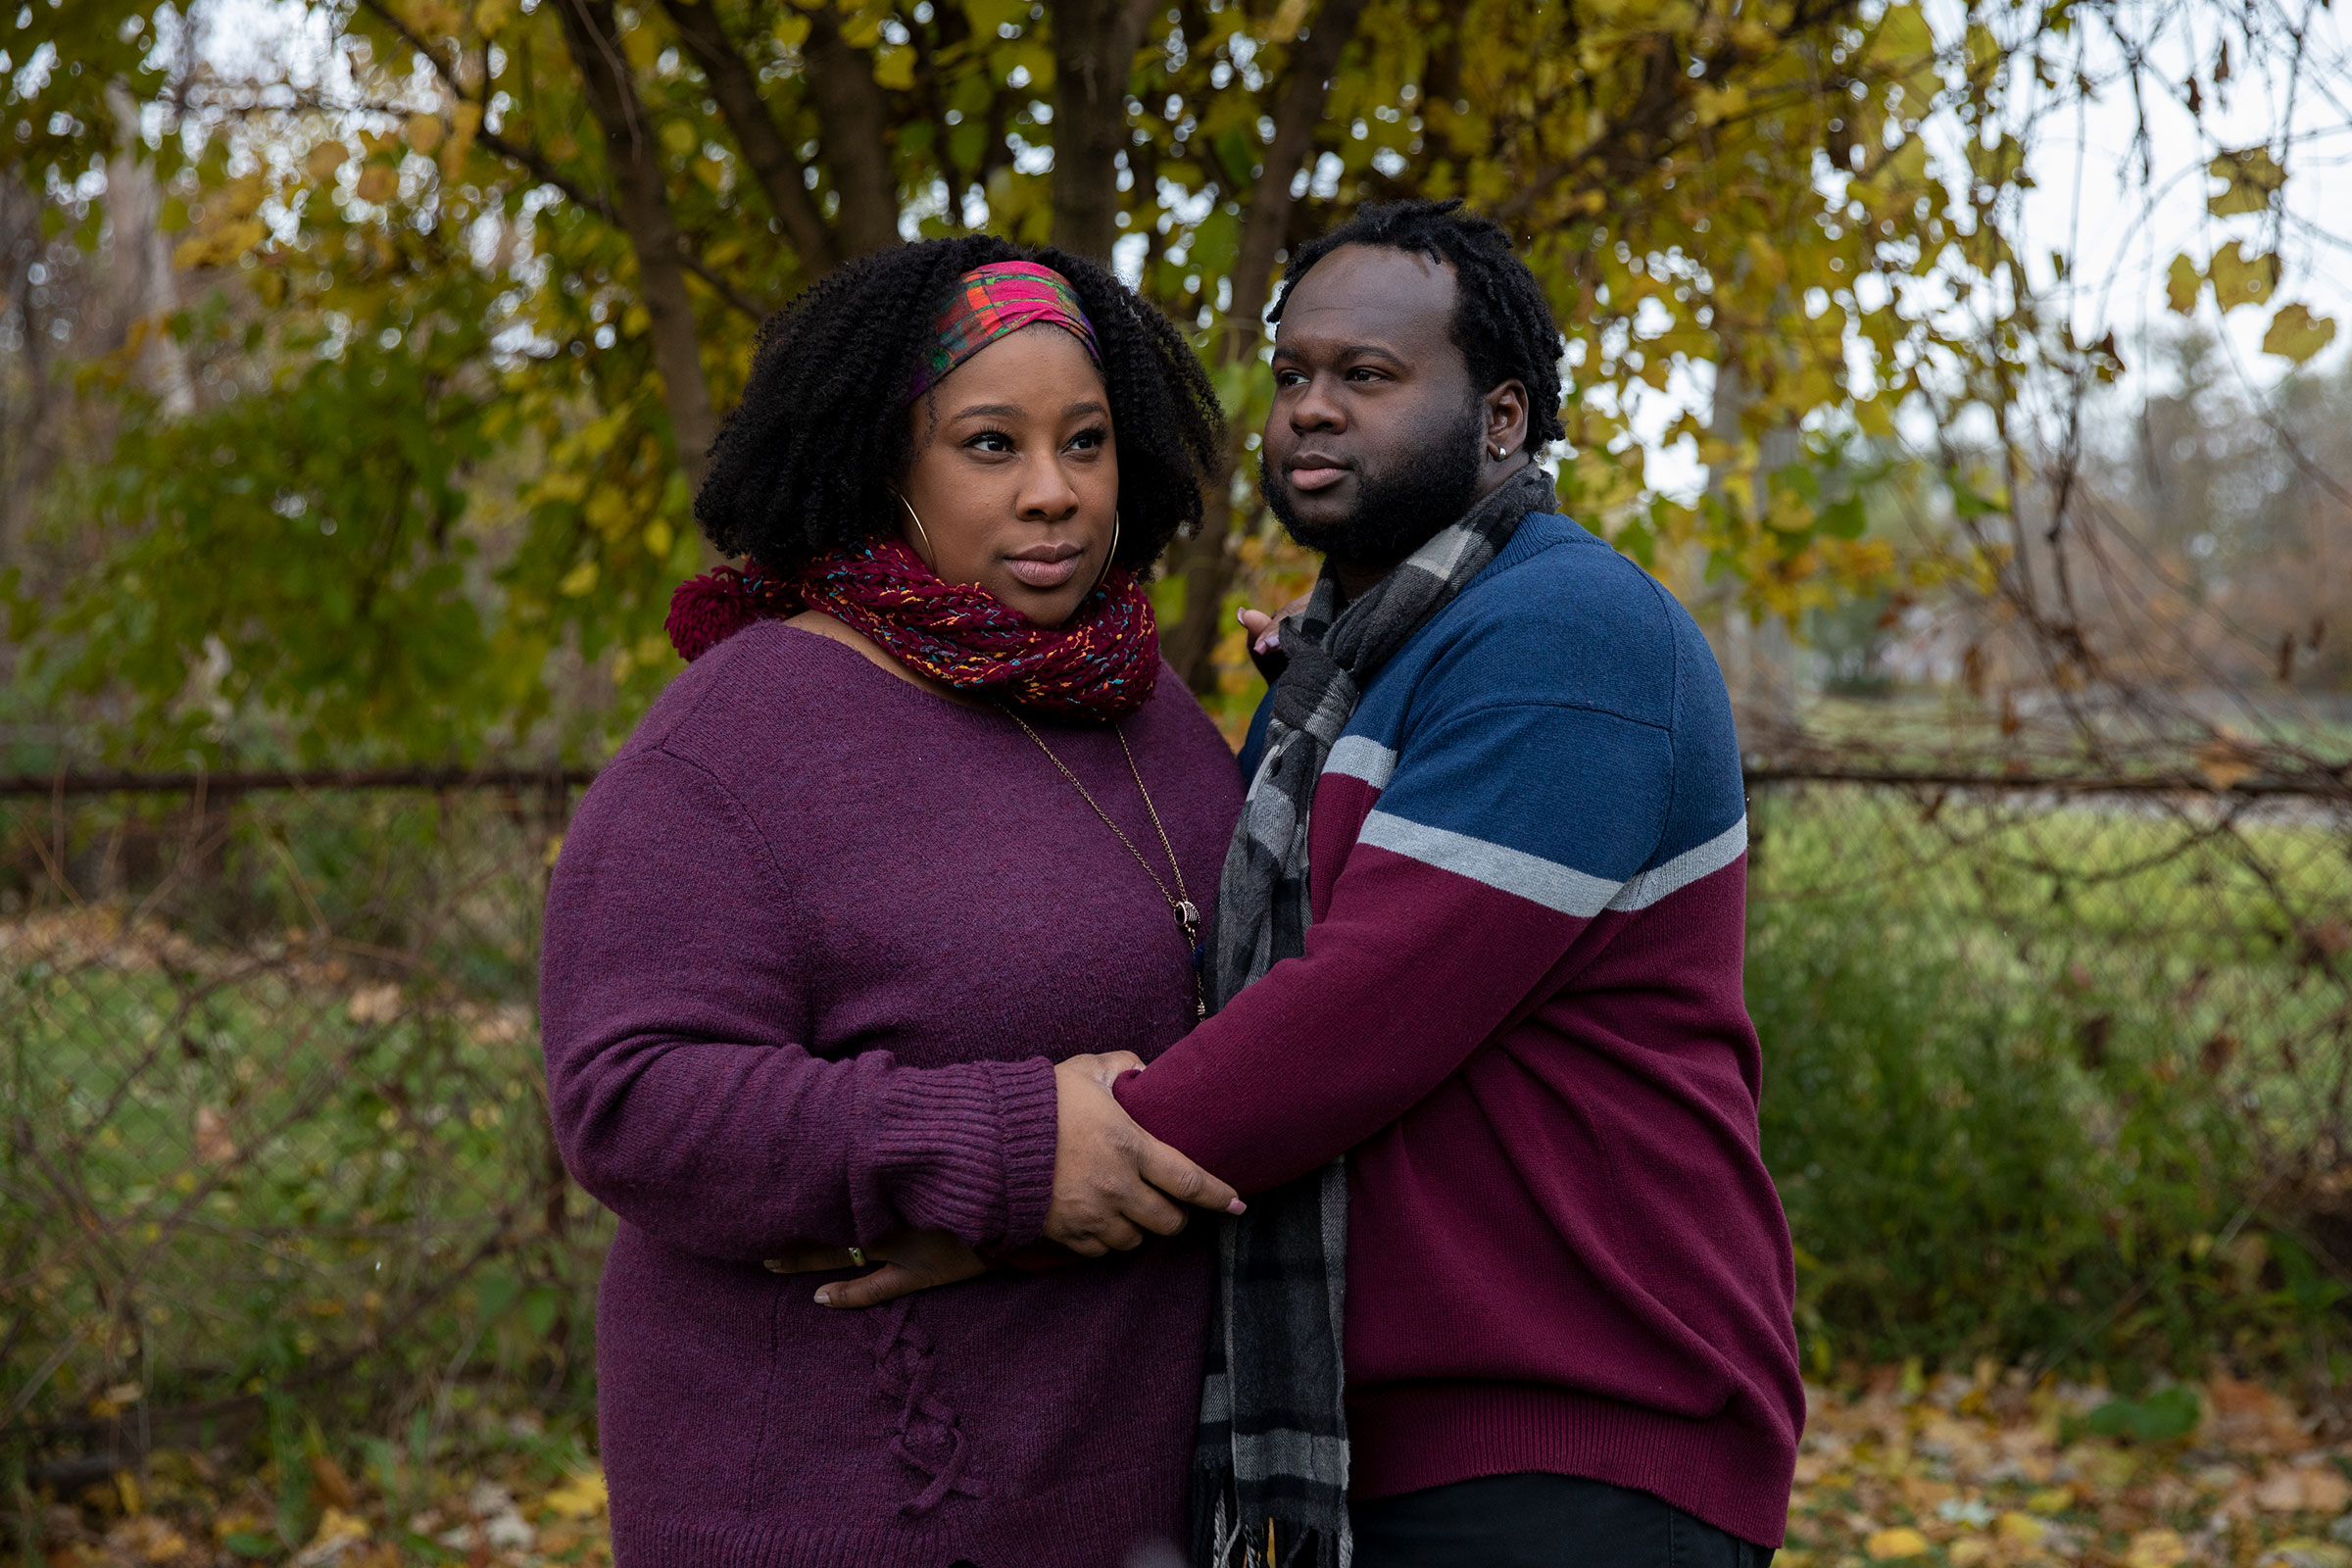 Aaron Jarvis poses for a portrait with her husband Marty Jarvis outside of their home in Detroit, Mich. on Nov. 1, 2020. (Elaine Cromie for TIME)